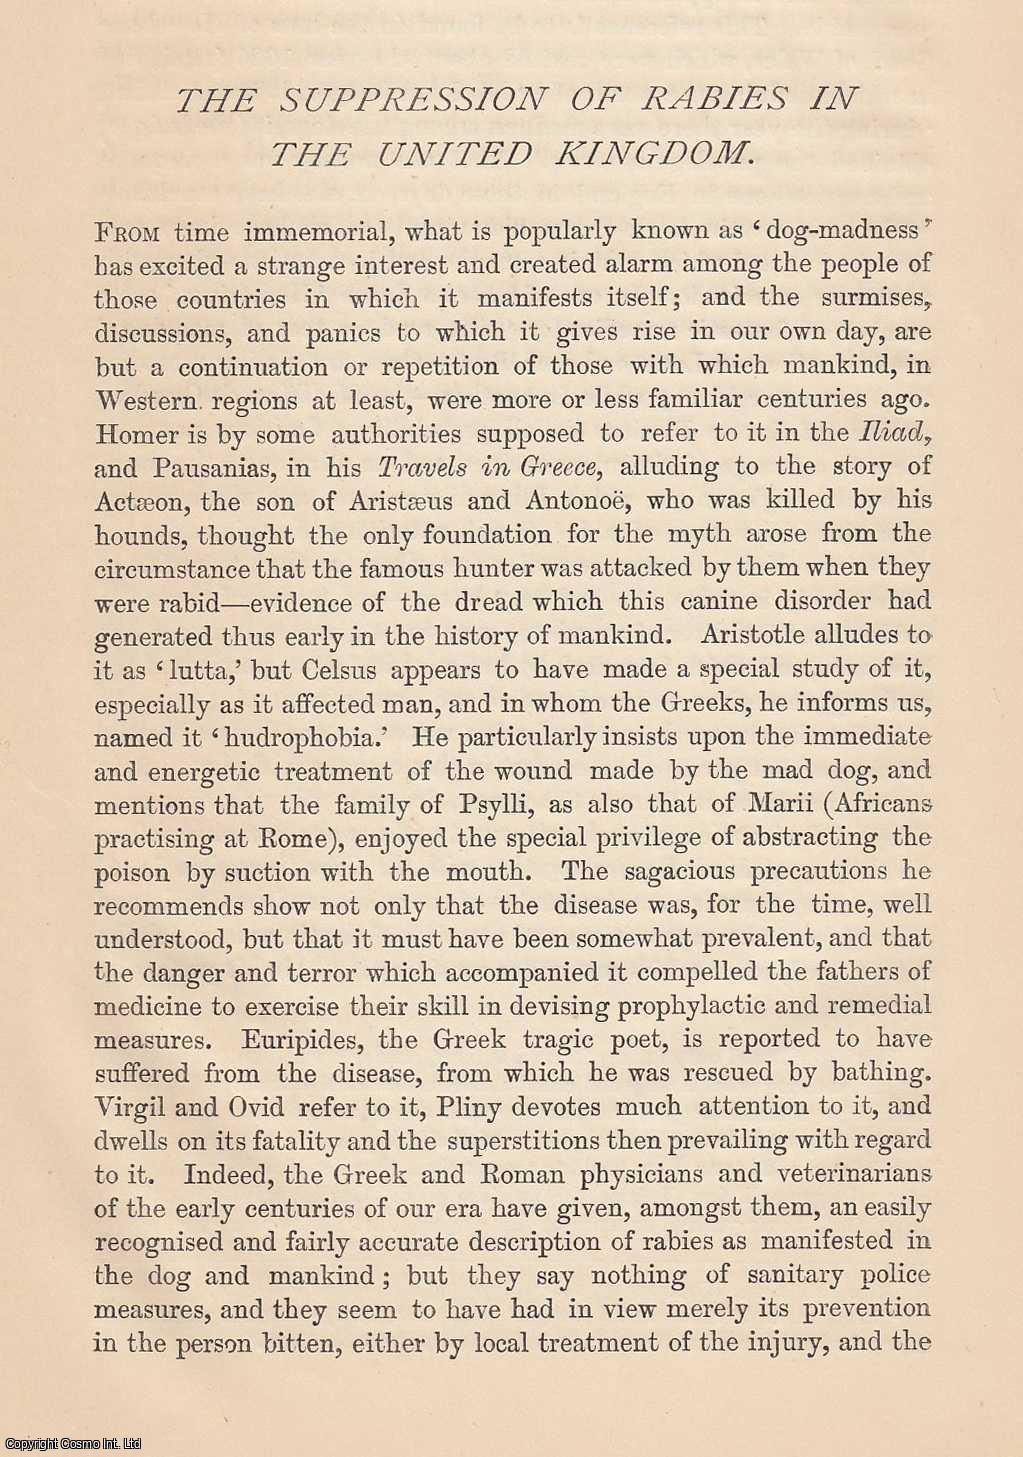 T. H. Huxley - Capital the mother of labour. With textual excerpts from 'Progress and Poverty'. A rare original article from the Nineteenth Century Magazine, 1890.